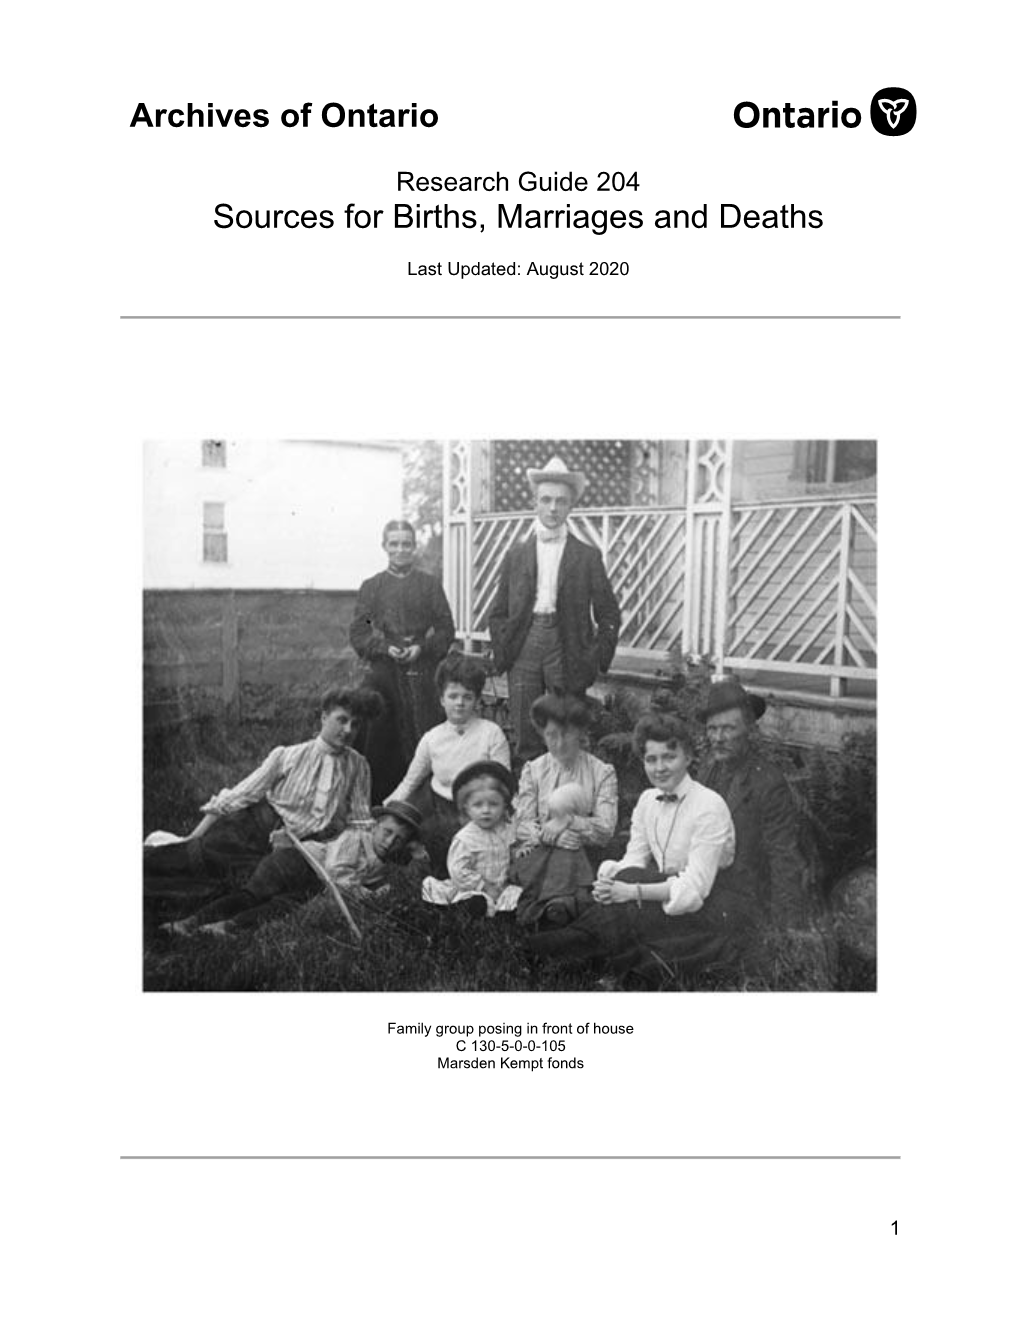 Sources for Birth, Marriage and Death